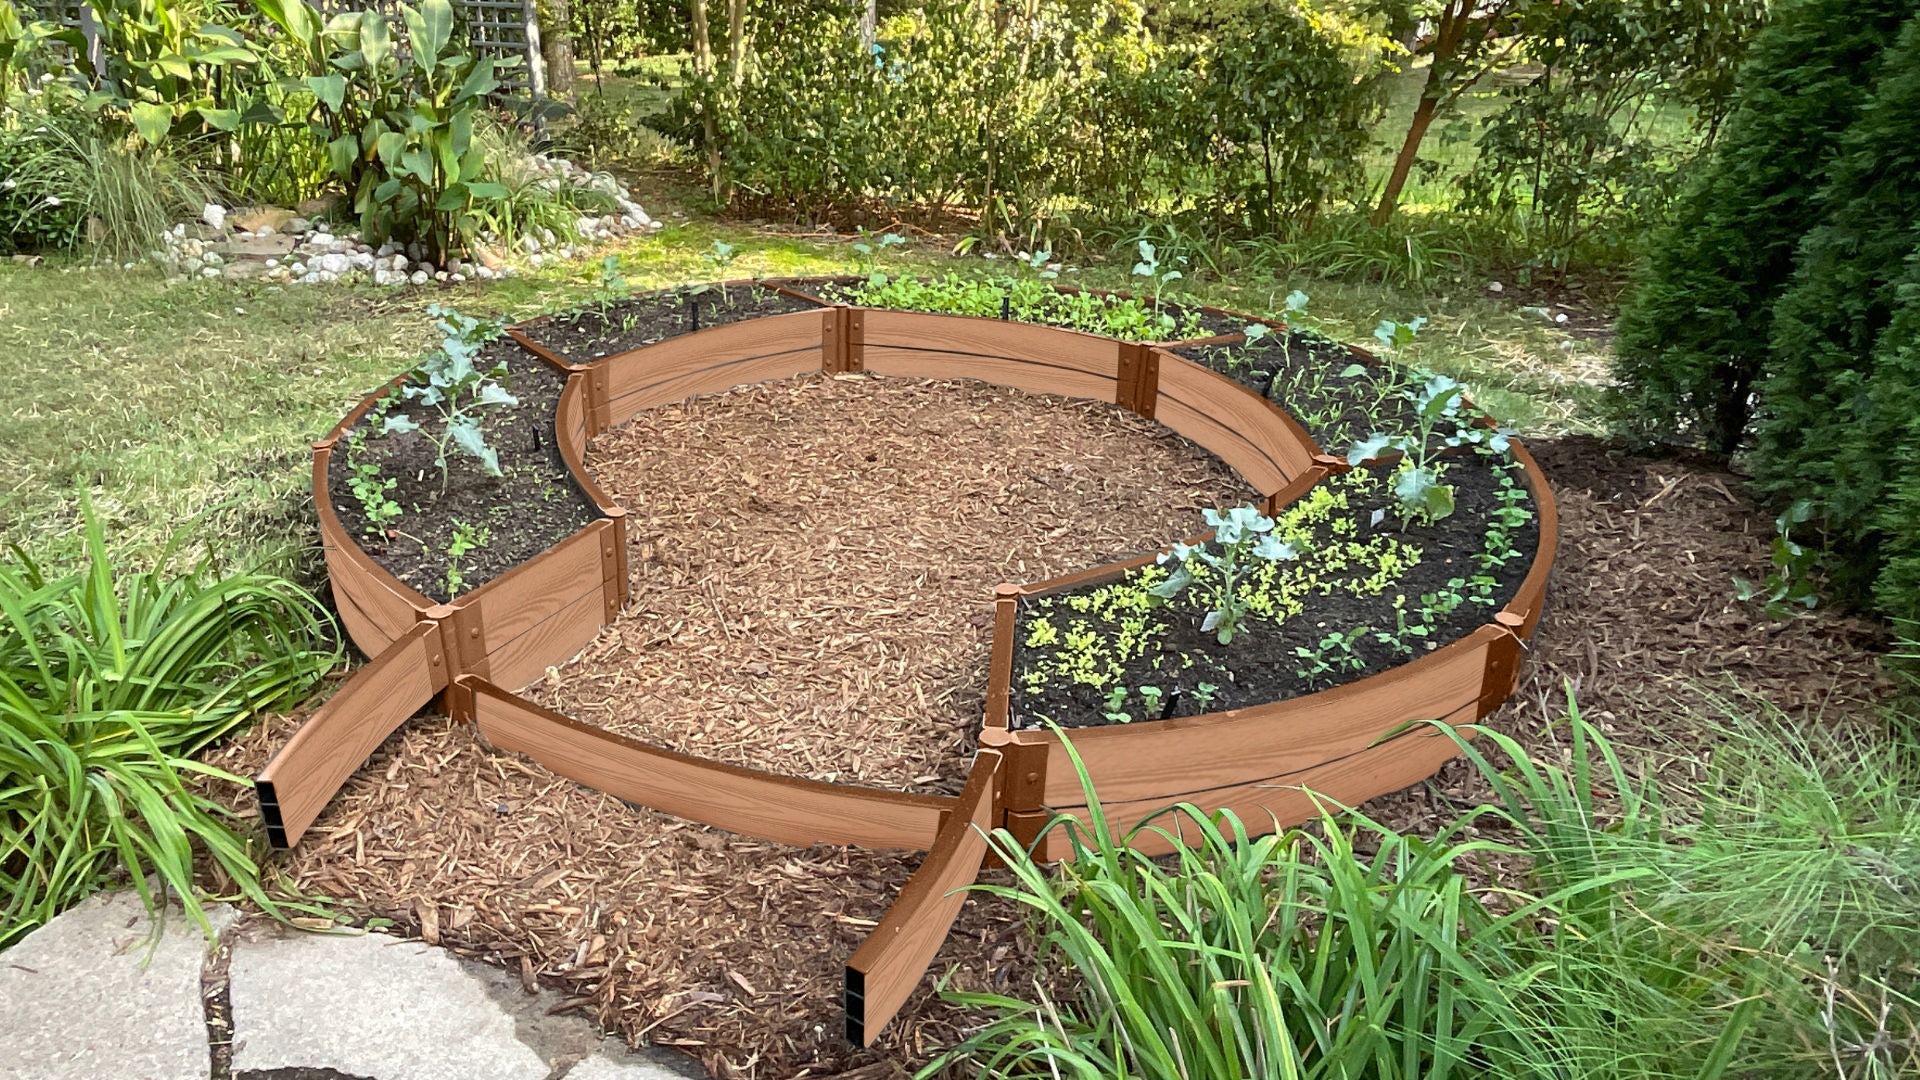 'Roundabout' 10' x 10' Raised Garden Bed Raised Garden Beds Frame It All Classic Sienna 2 Inch None None